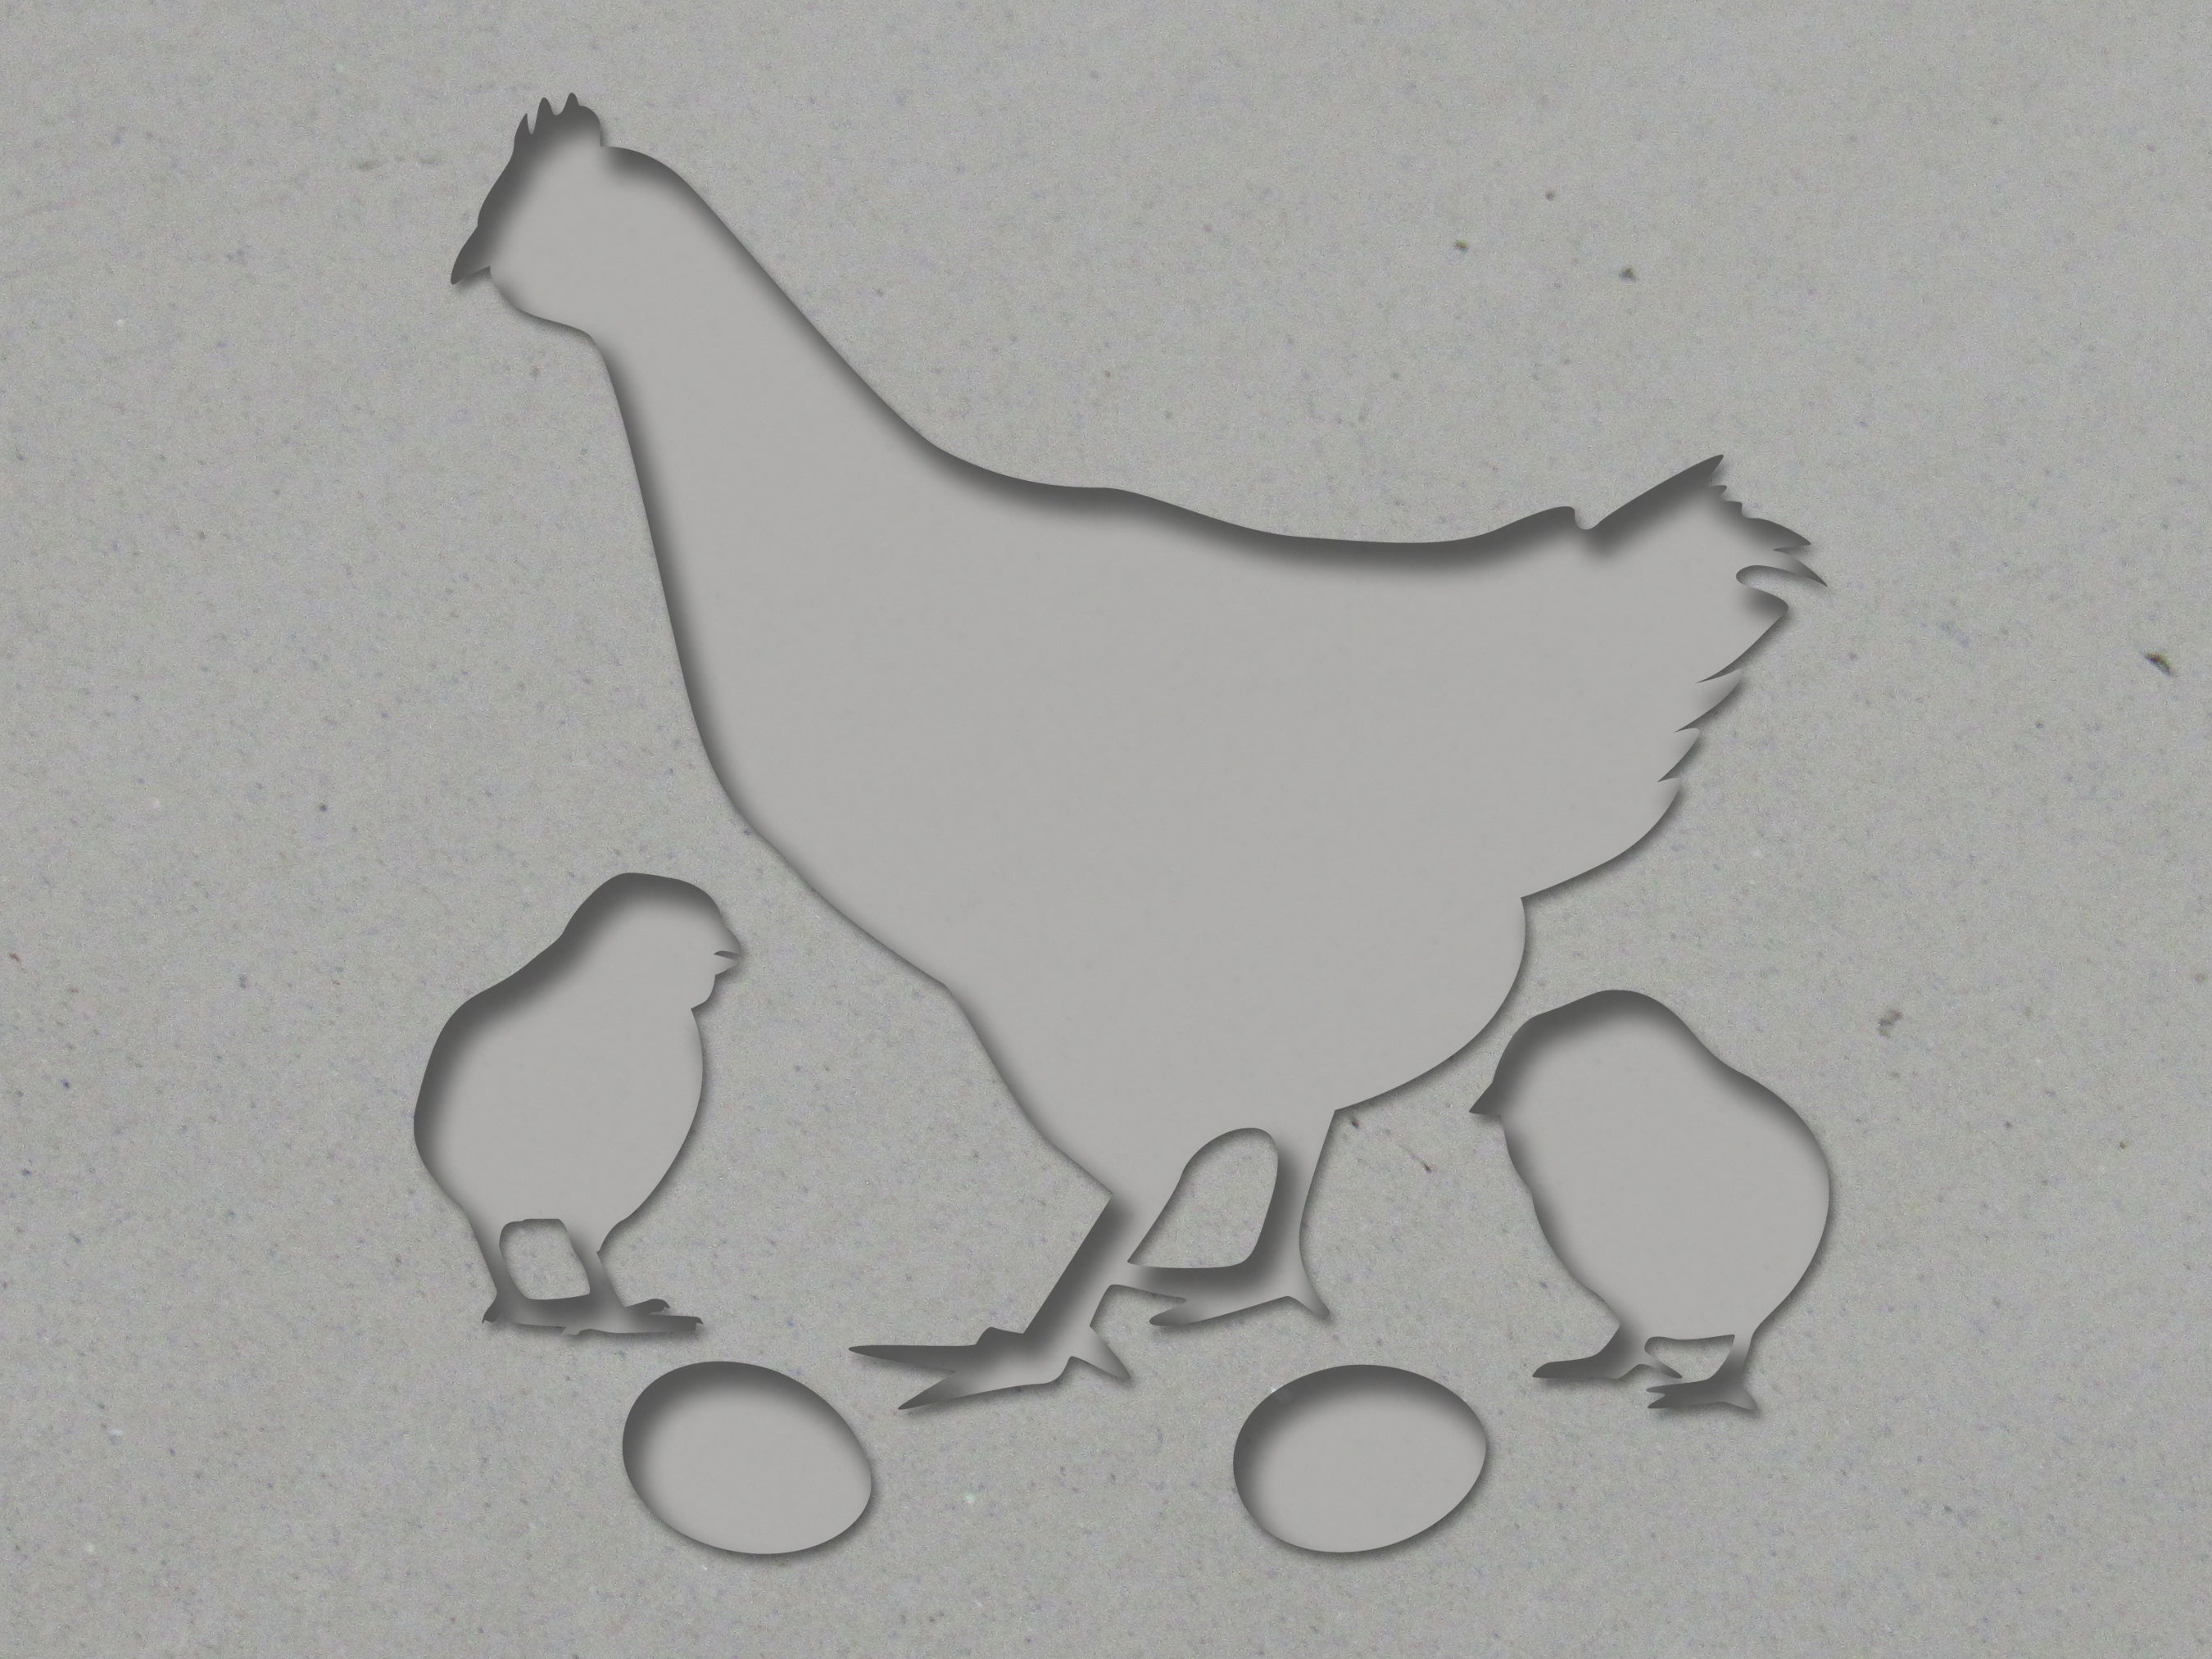 Mug design featuring a Mother Hen and Baby Chicks, Mug clay stamp for handbuild pottery